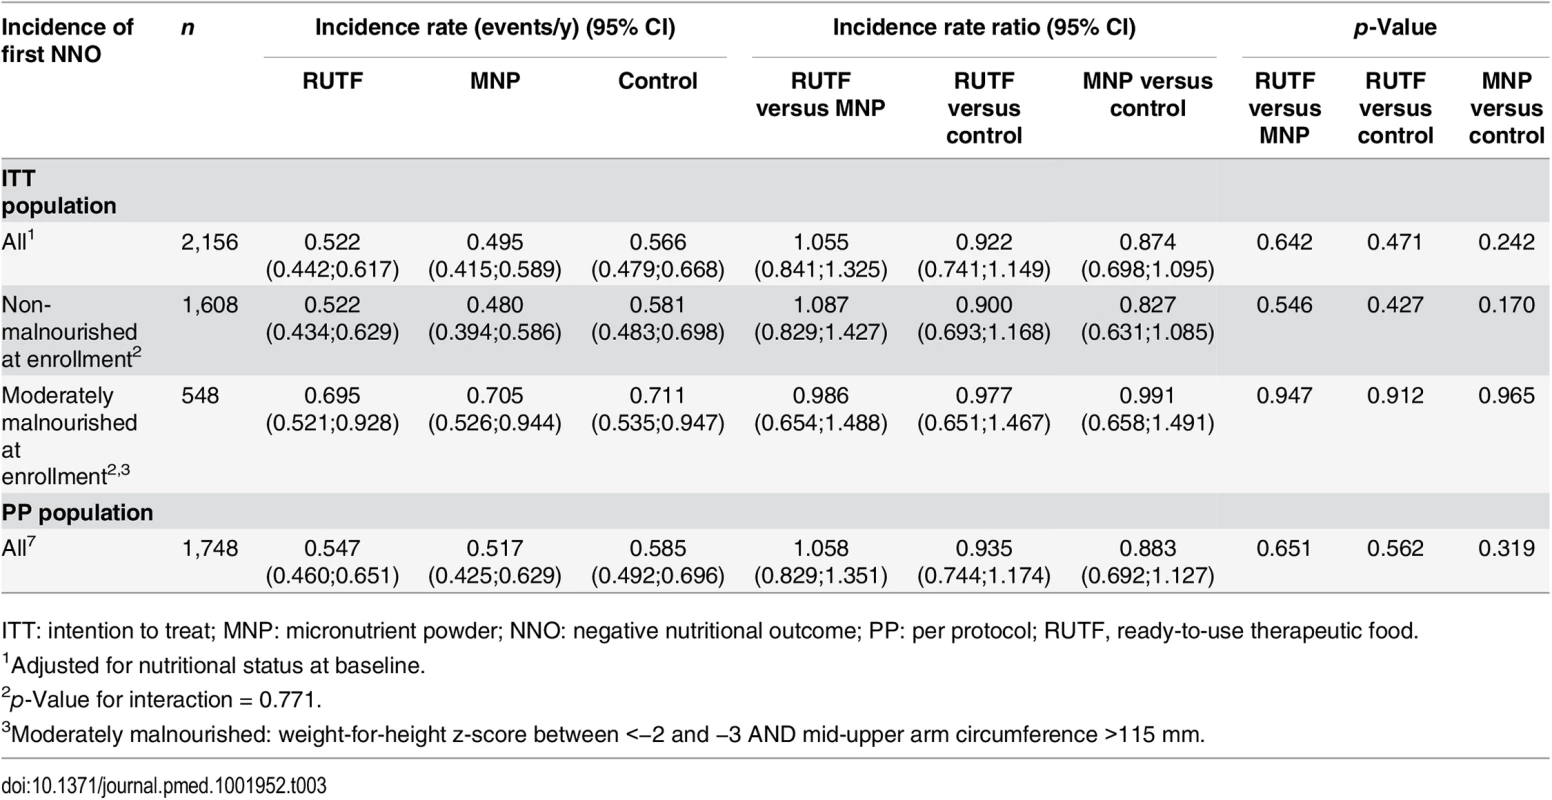 Incidence of first NNO (negative nutritional outcome) per y.